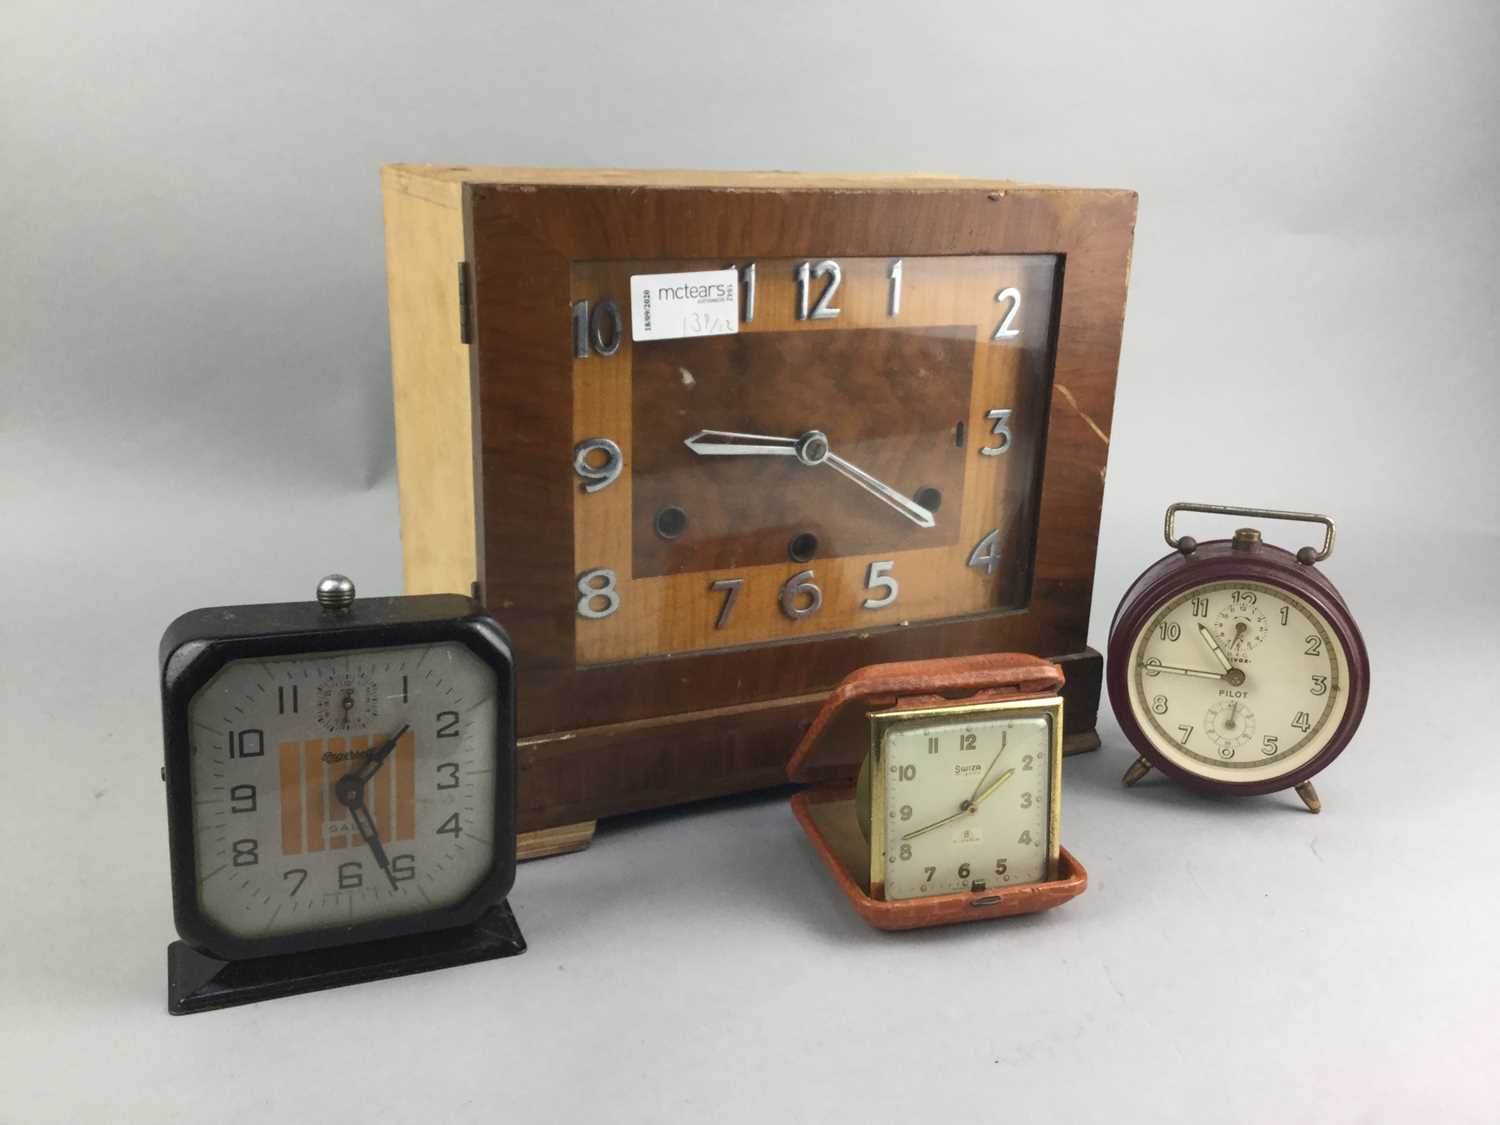 Lot 139 - A BERTMAR MANTEL CLOCK AND OTHER VARIOUS CLOCKS AND TRAVELLING TIMEPIECES